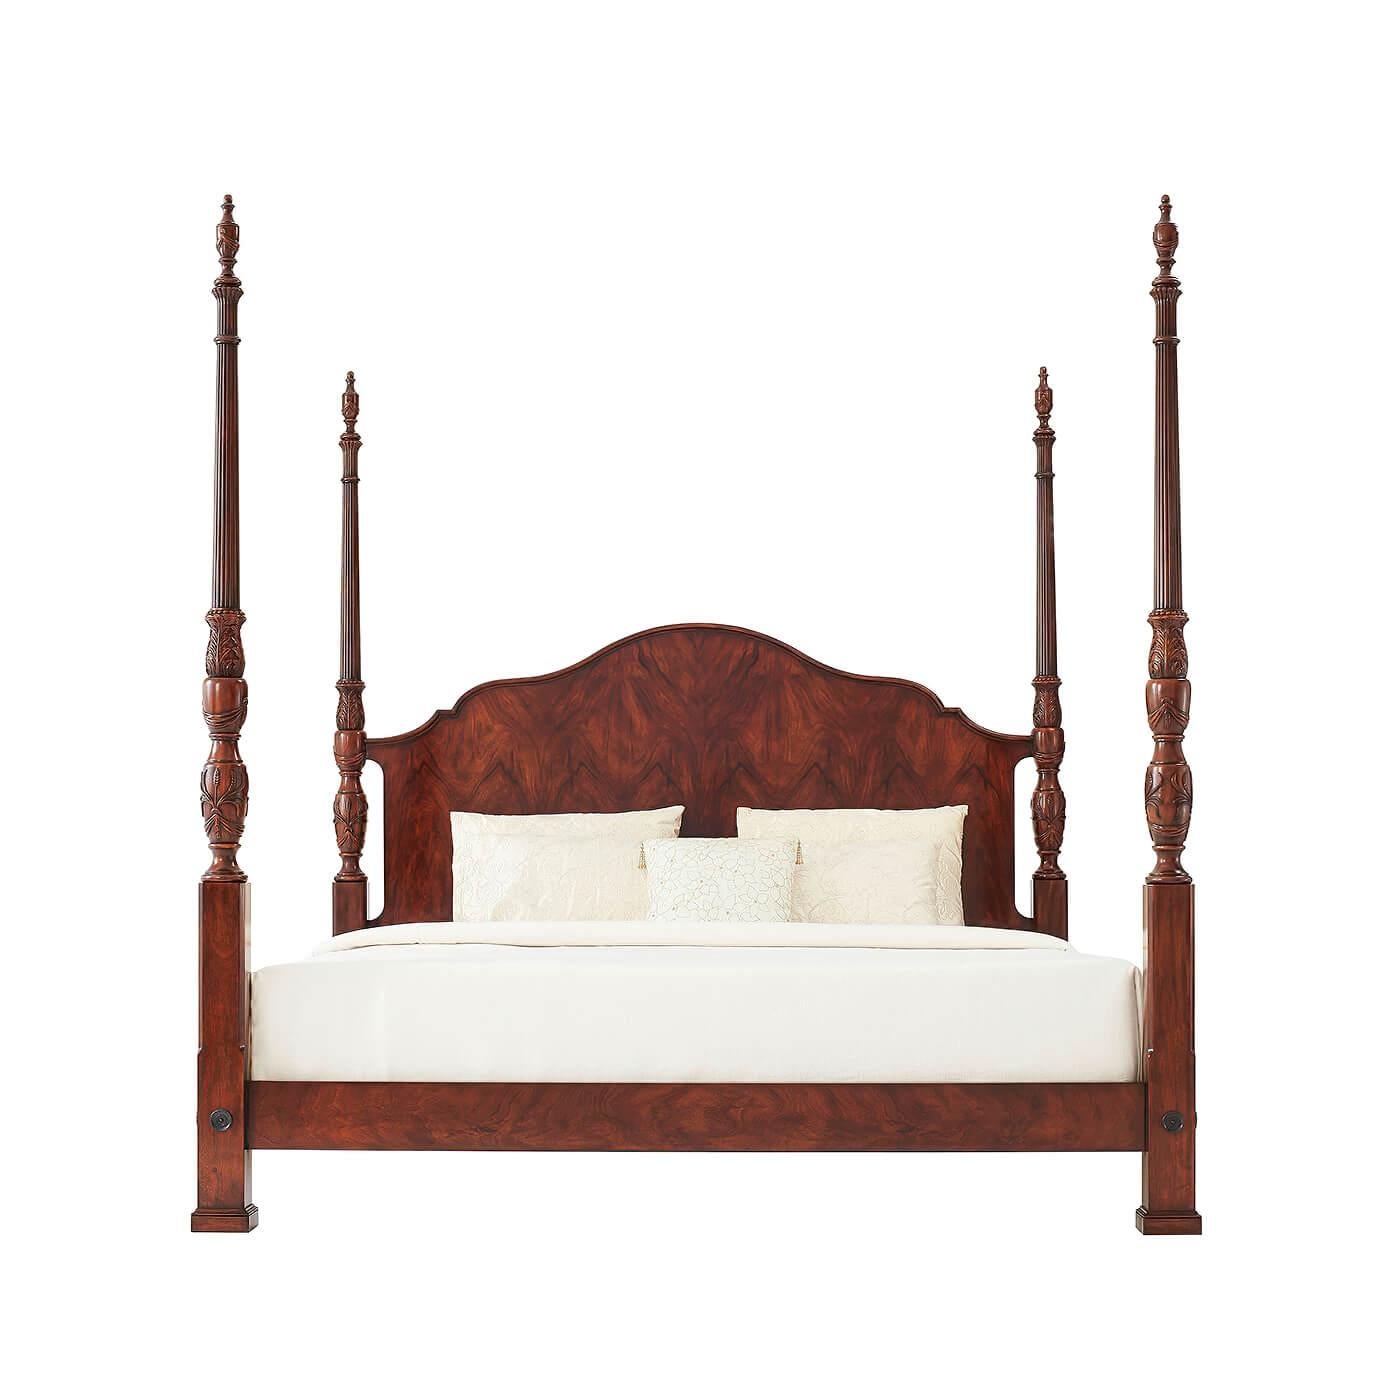 A finely carved mahogany and figured mahogany rice bed, the serpentine arched and molded edge headboard flanked by acanthus leaf and rice carved baluster turned posts with urn finials, the figured mahogany rails with brass rosettes to the posts.